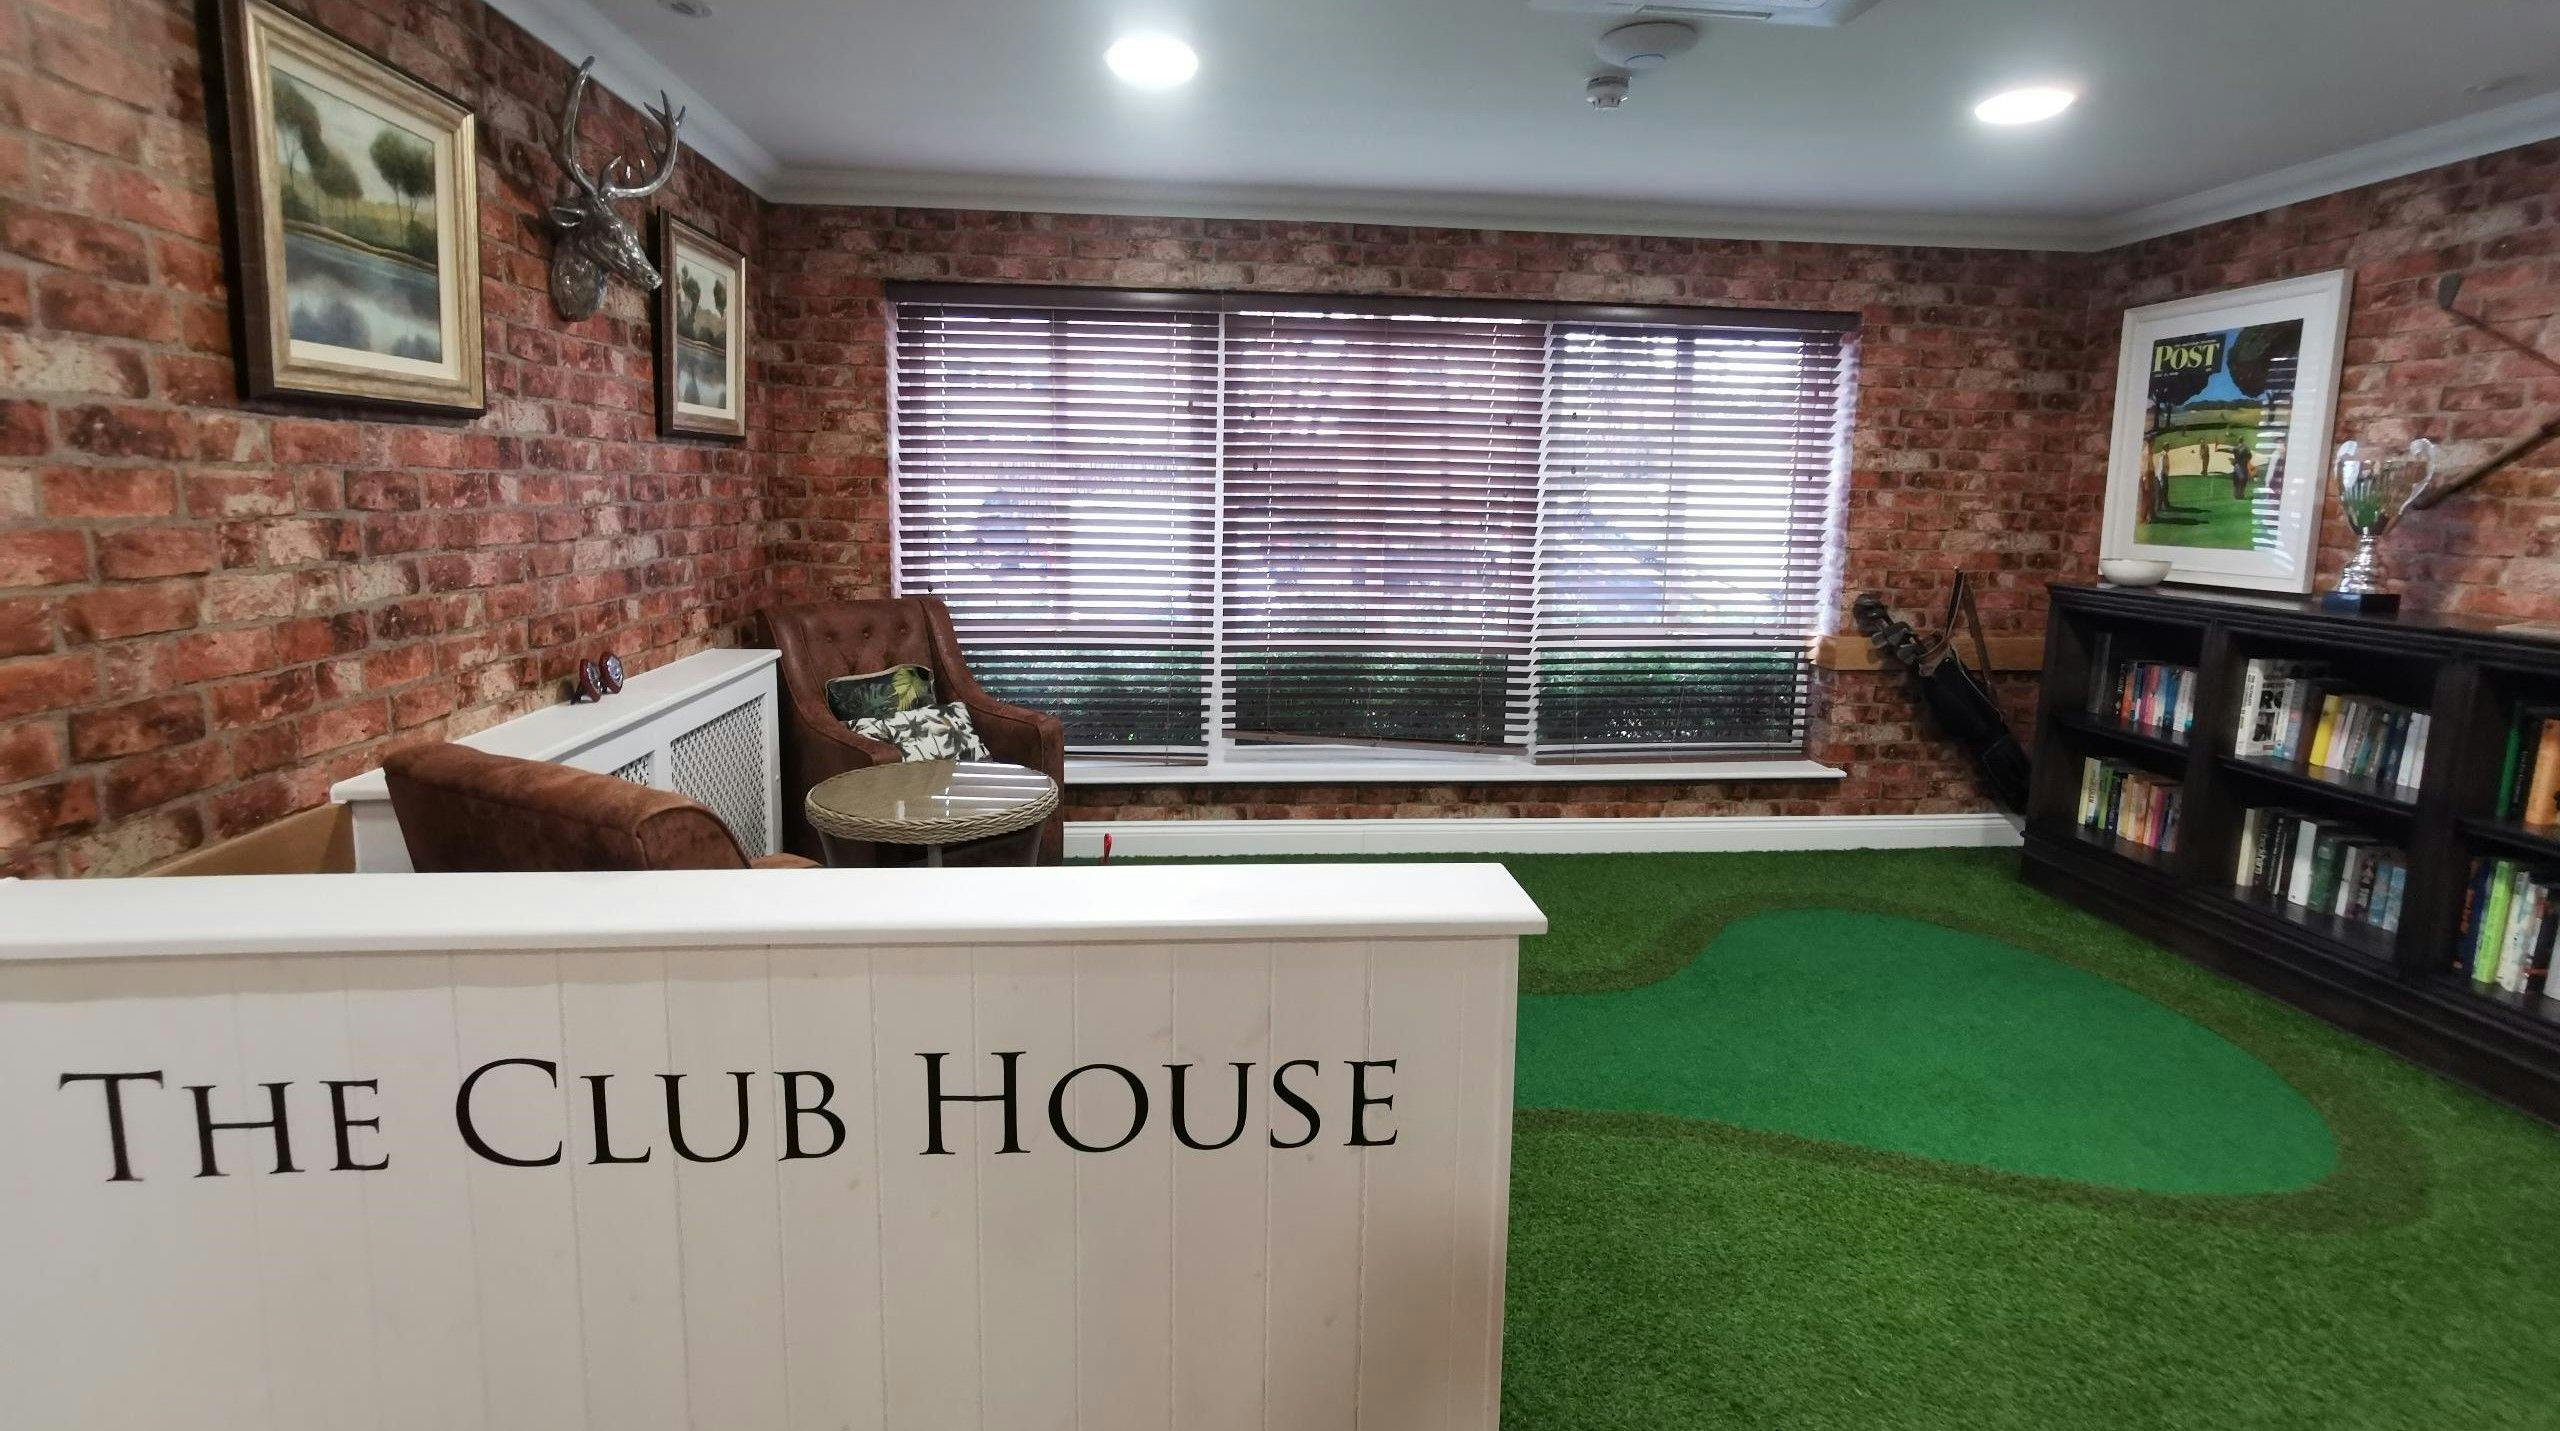 The Club House of Cuffley Manor care home in Potters Bar, Hertfordshire